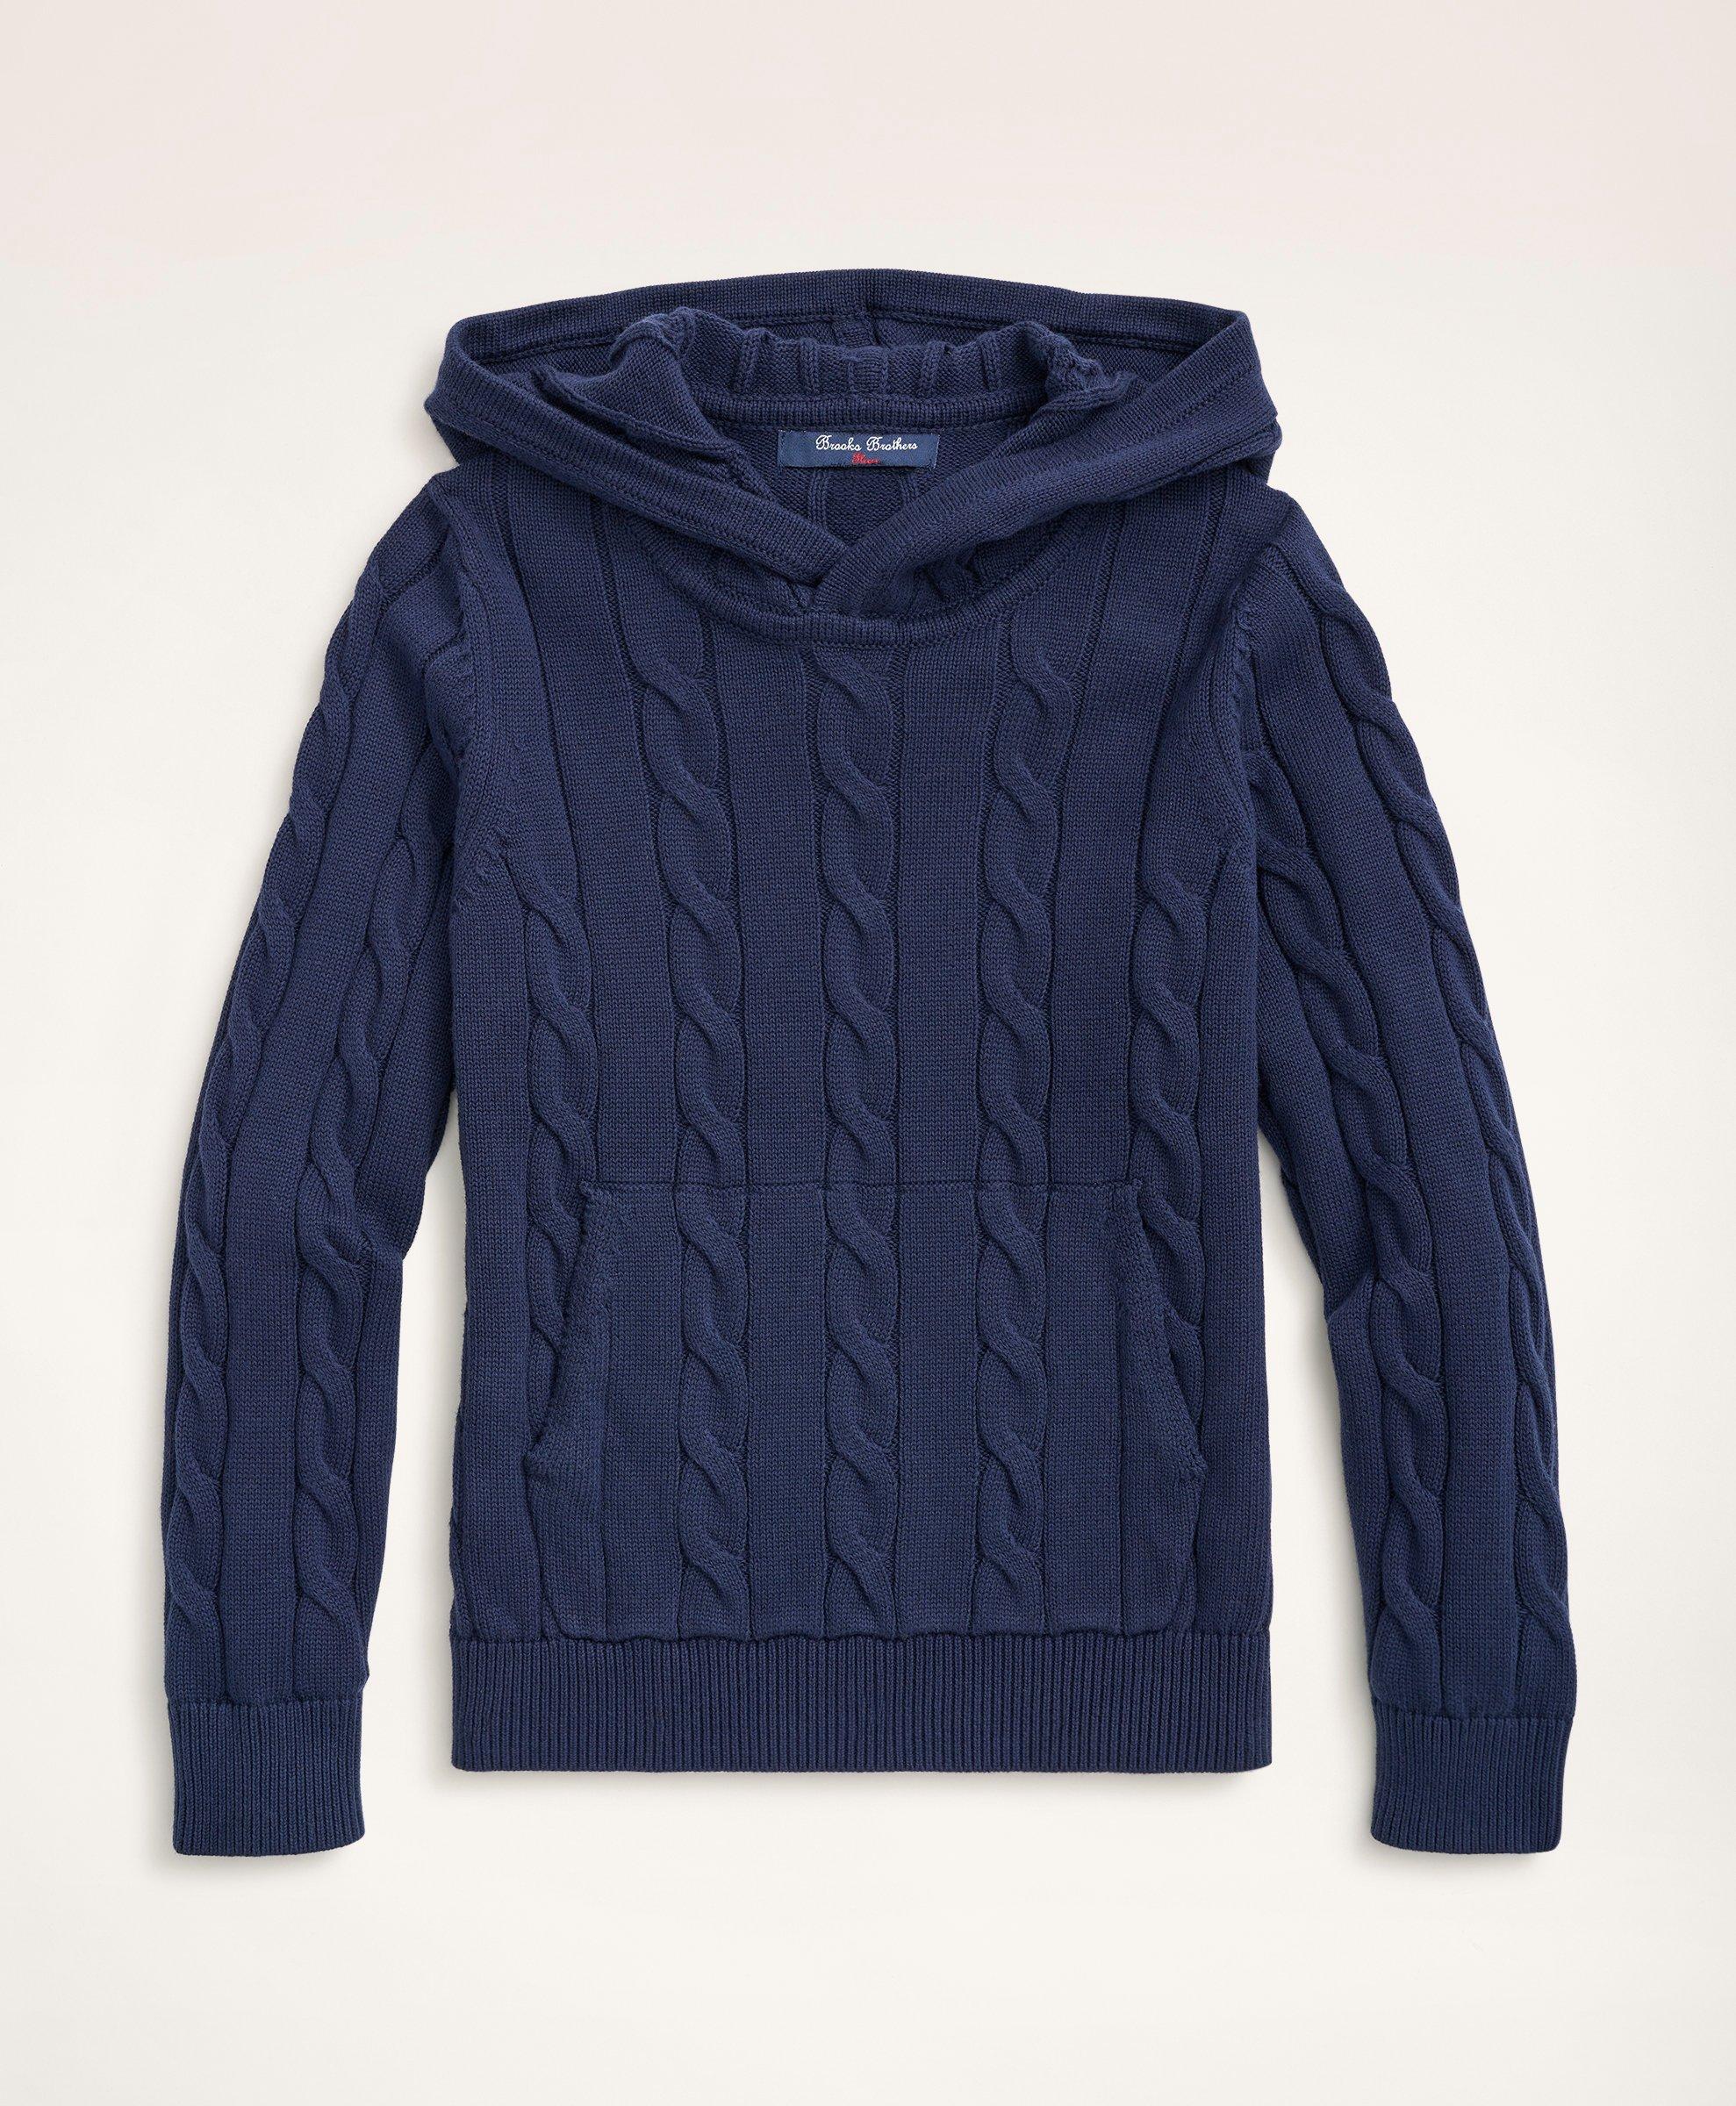 Brooks Brothers Kids'  Boys Cotton Cable-knit Hoodie Sweater | Navy | Size Medium